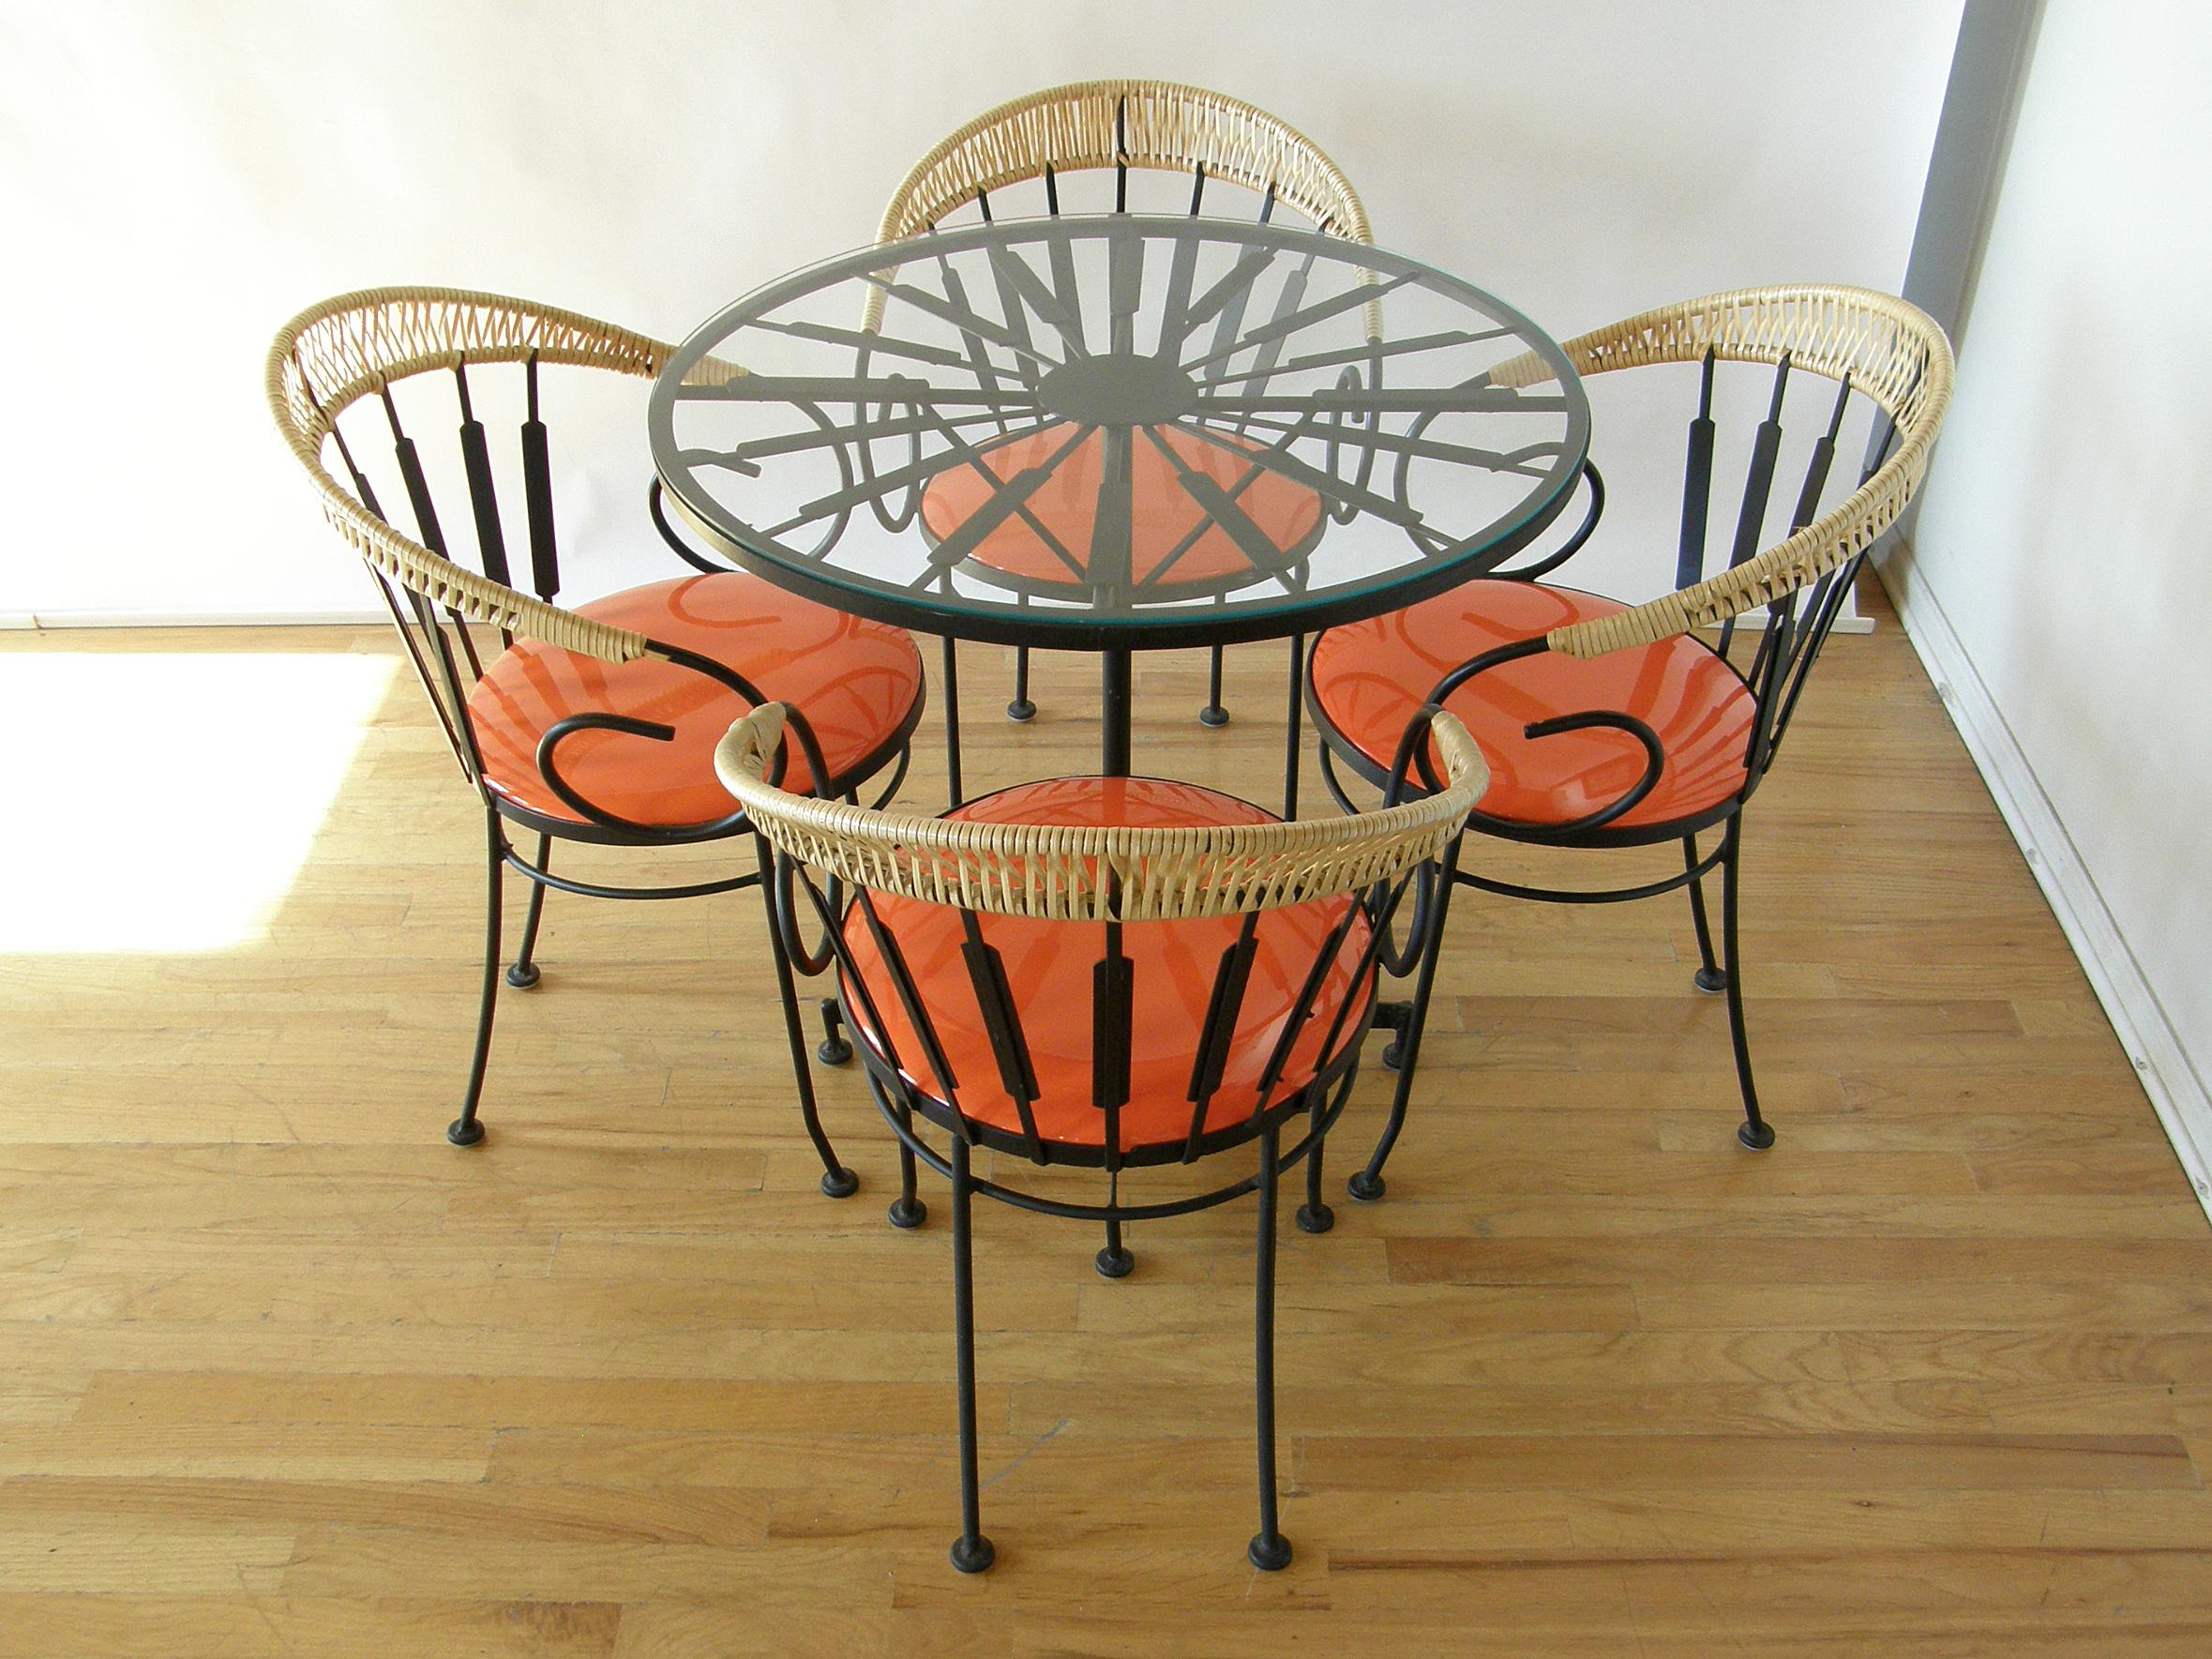 This festive dinette set was designed by Arthur Umanoff for Shaver Howard. The frames are wrought iron, and the table and chairs all have an abstract, feather-like detail. They form a kind of sunburst effect on the table underneath the glass top. On